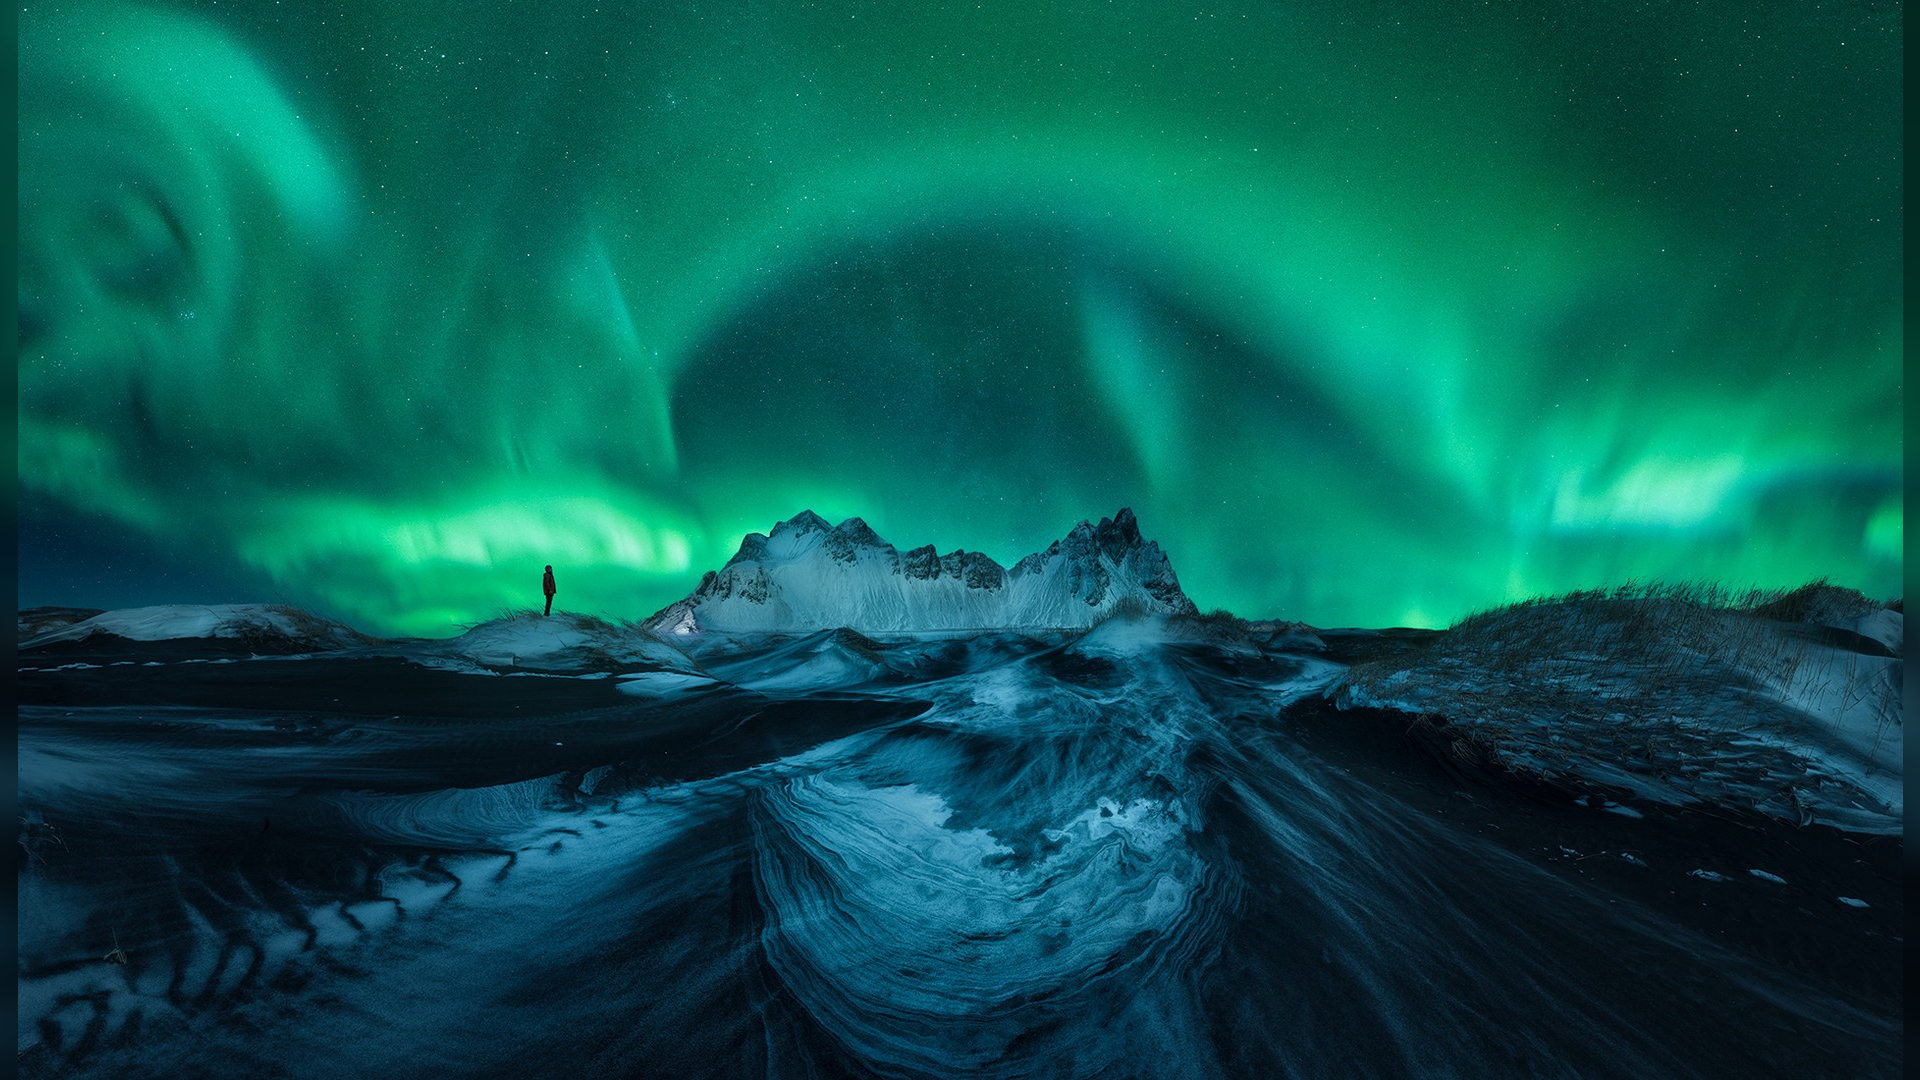 A photo of the northern lights, part of the travel photography blog Capture the Atlas 2022 Northern Lights Photographer of the Year collection. This image was taken by Asier Lopez Castro.